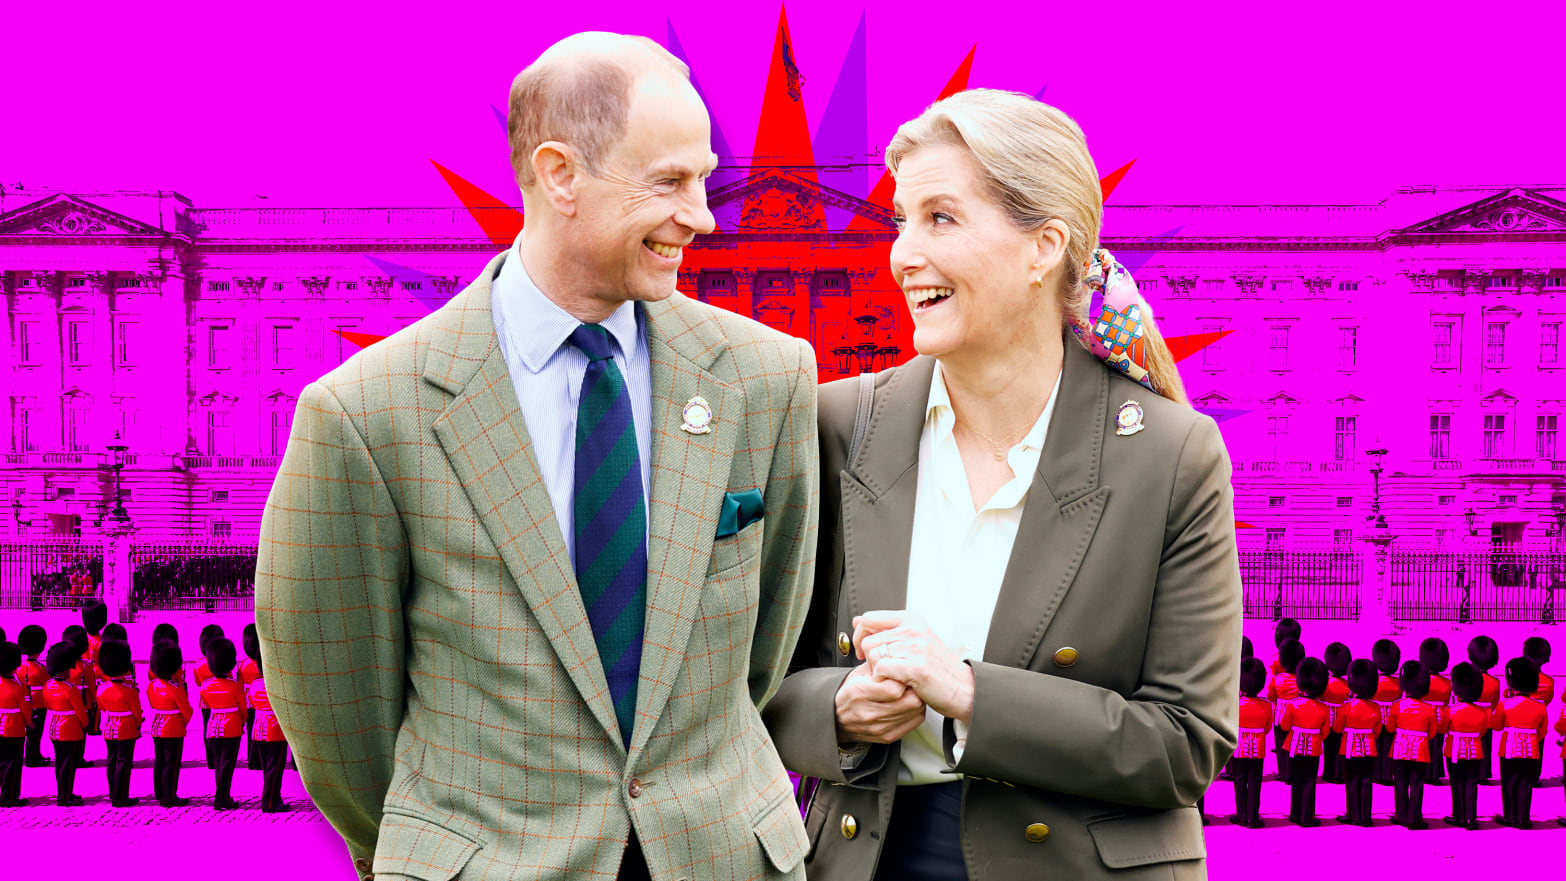 A photo illustration of Prince Edward and Sophie.